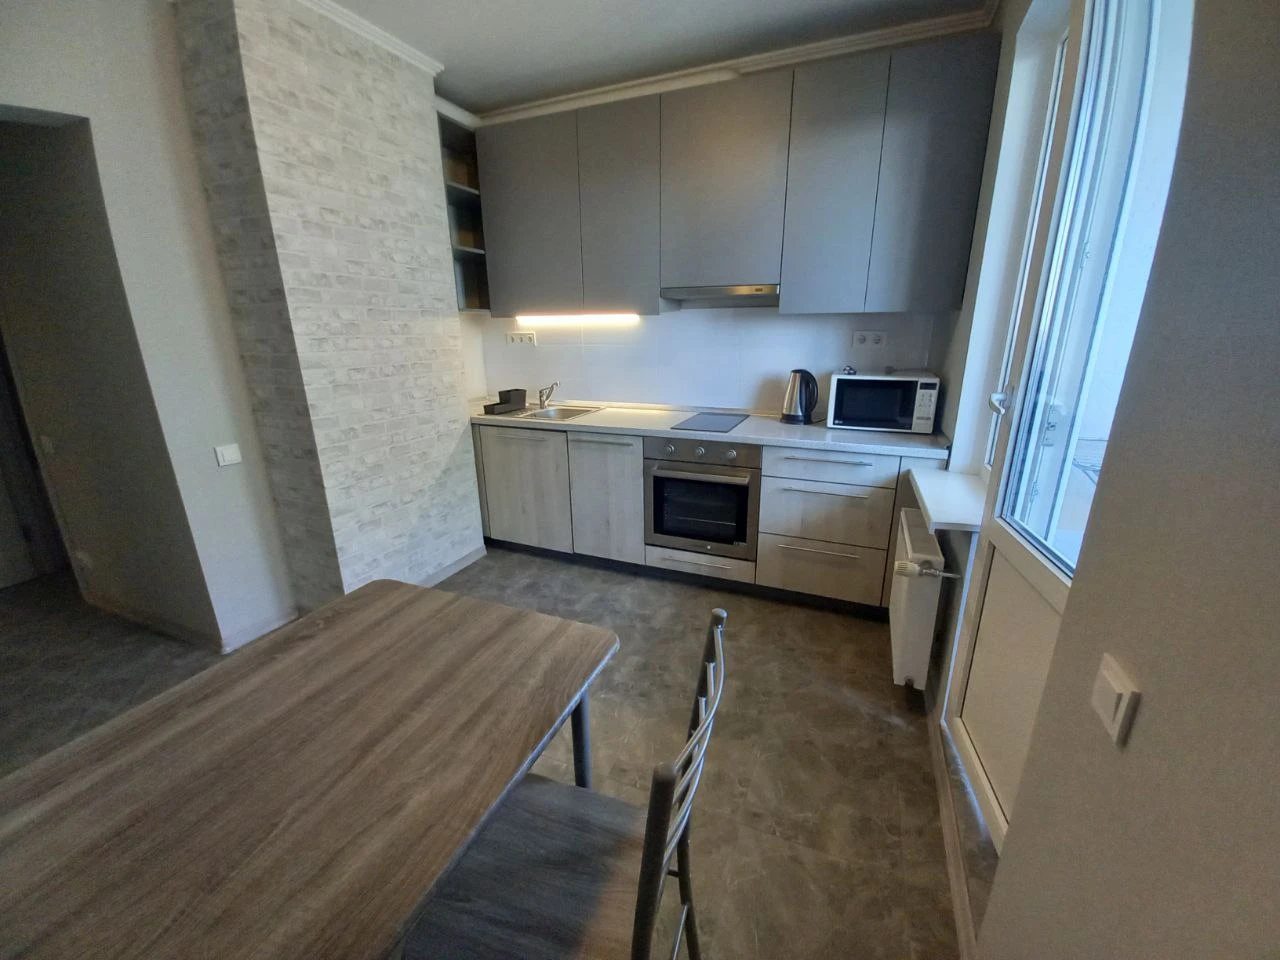 Apartment for rent. 1 room, 43 m², 21 floor/25 floors. 2, Doncya Mihayla 2, Kyiv. 